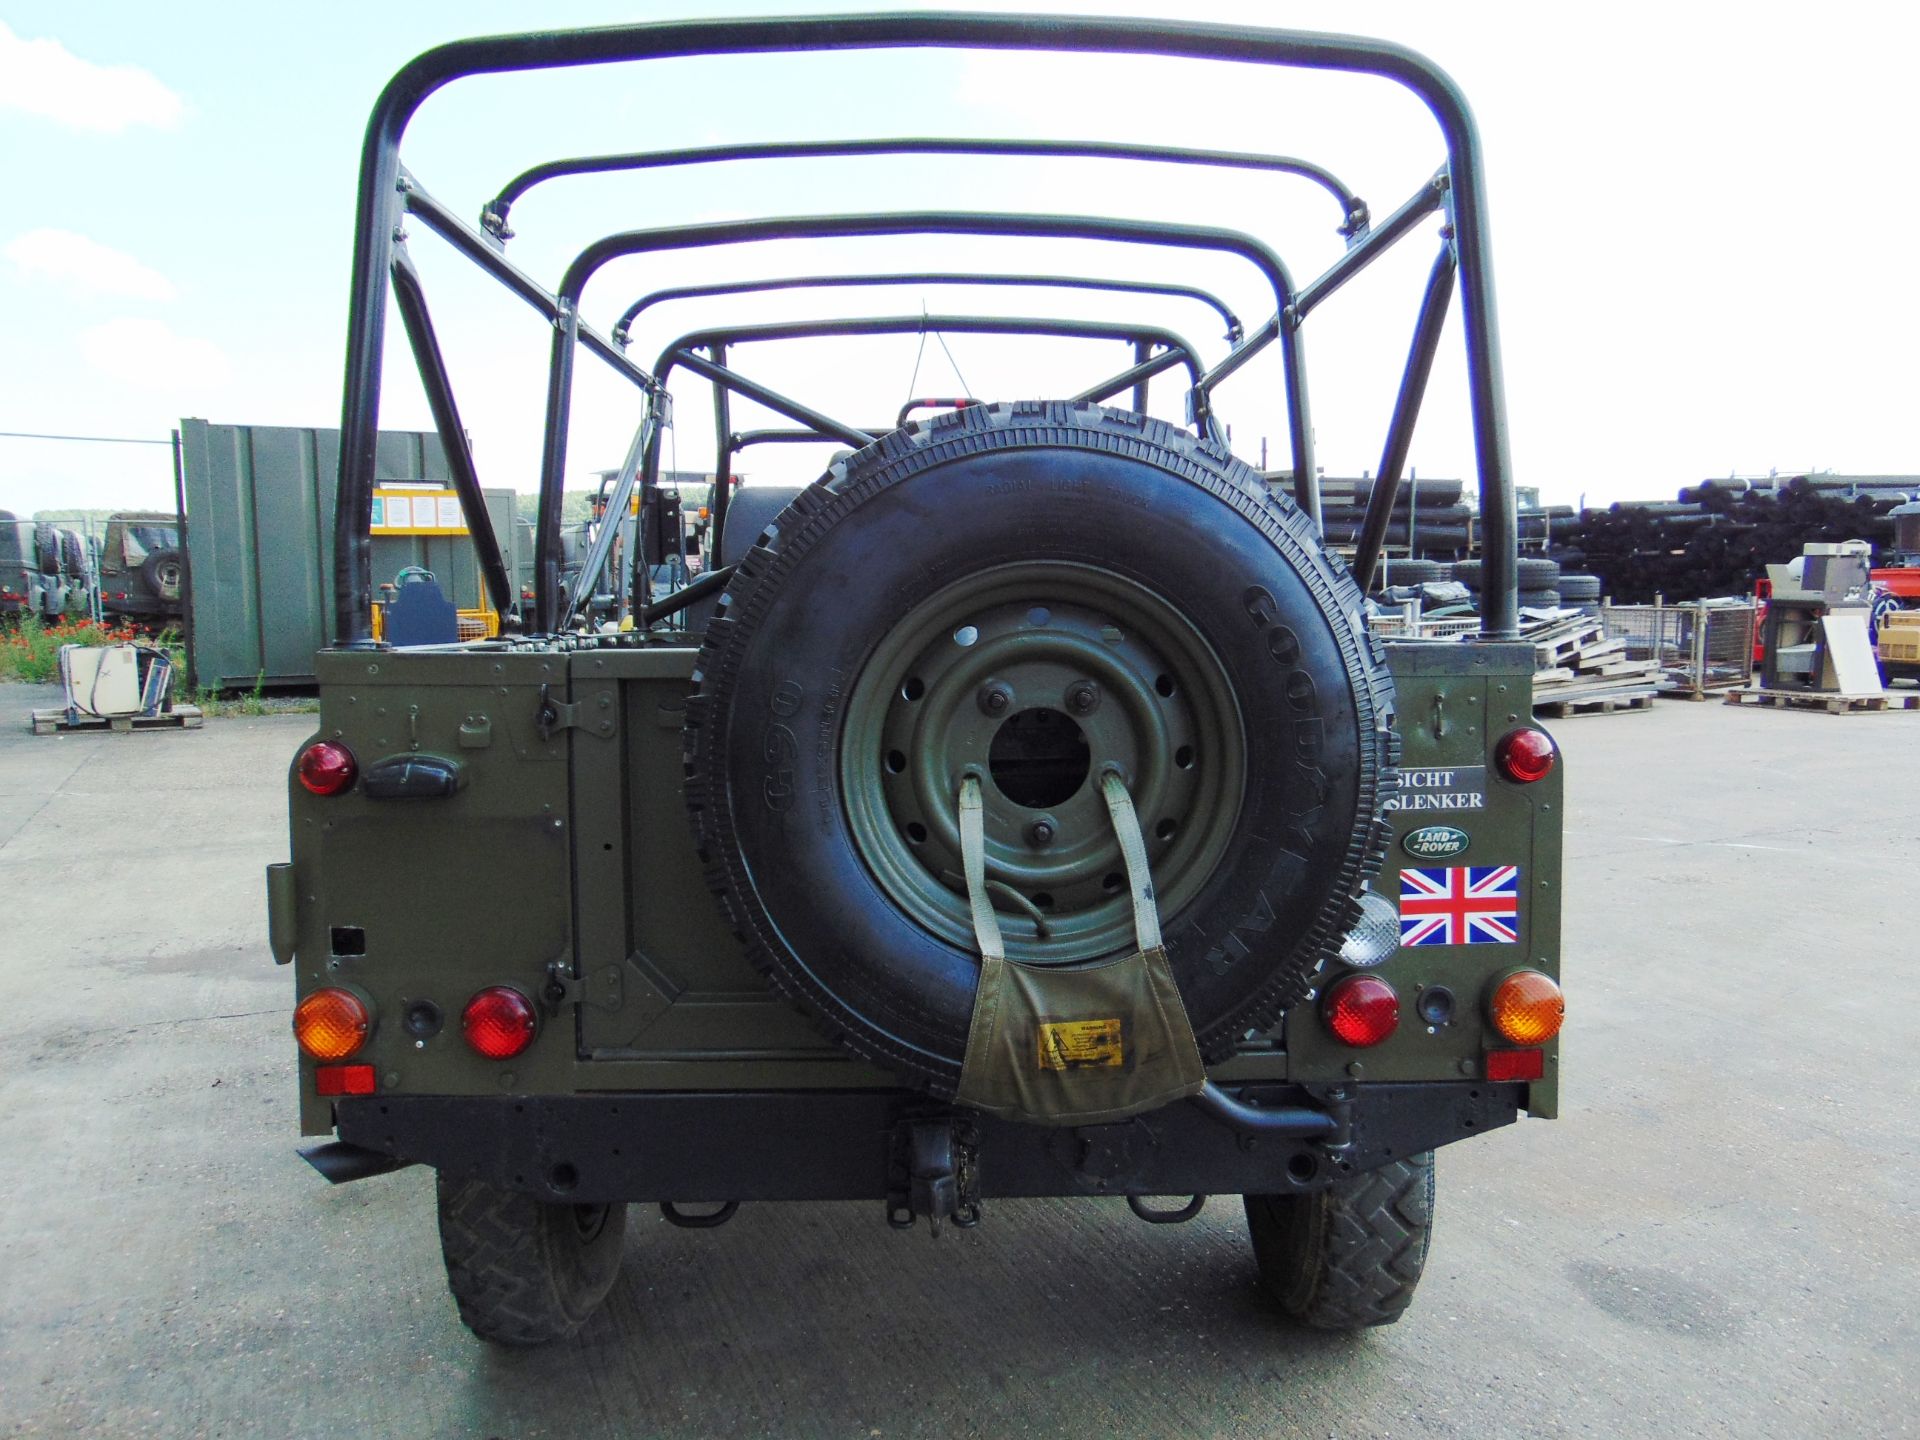 Land Rover Defender Wolf 110 Scout vehicle 300 Tdi - Image 8 of 37